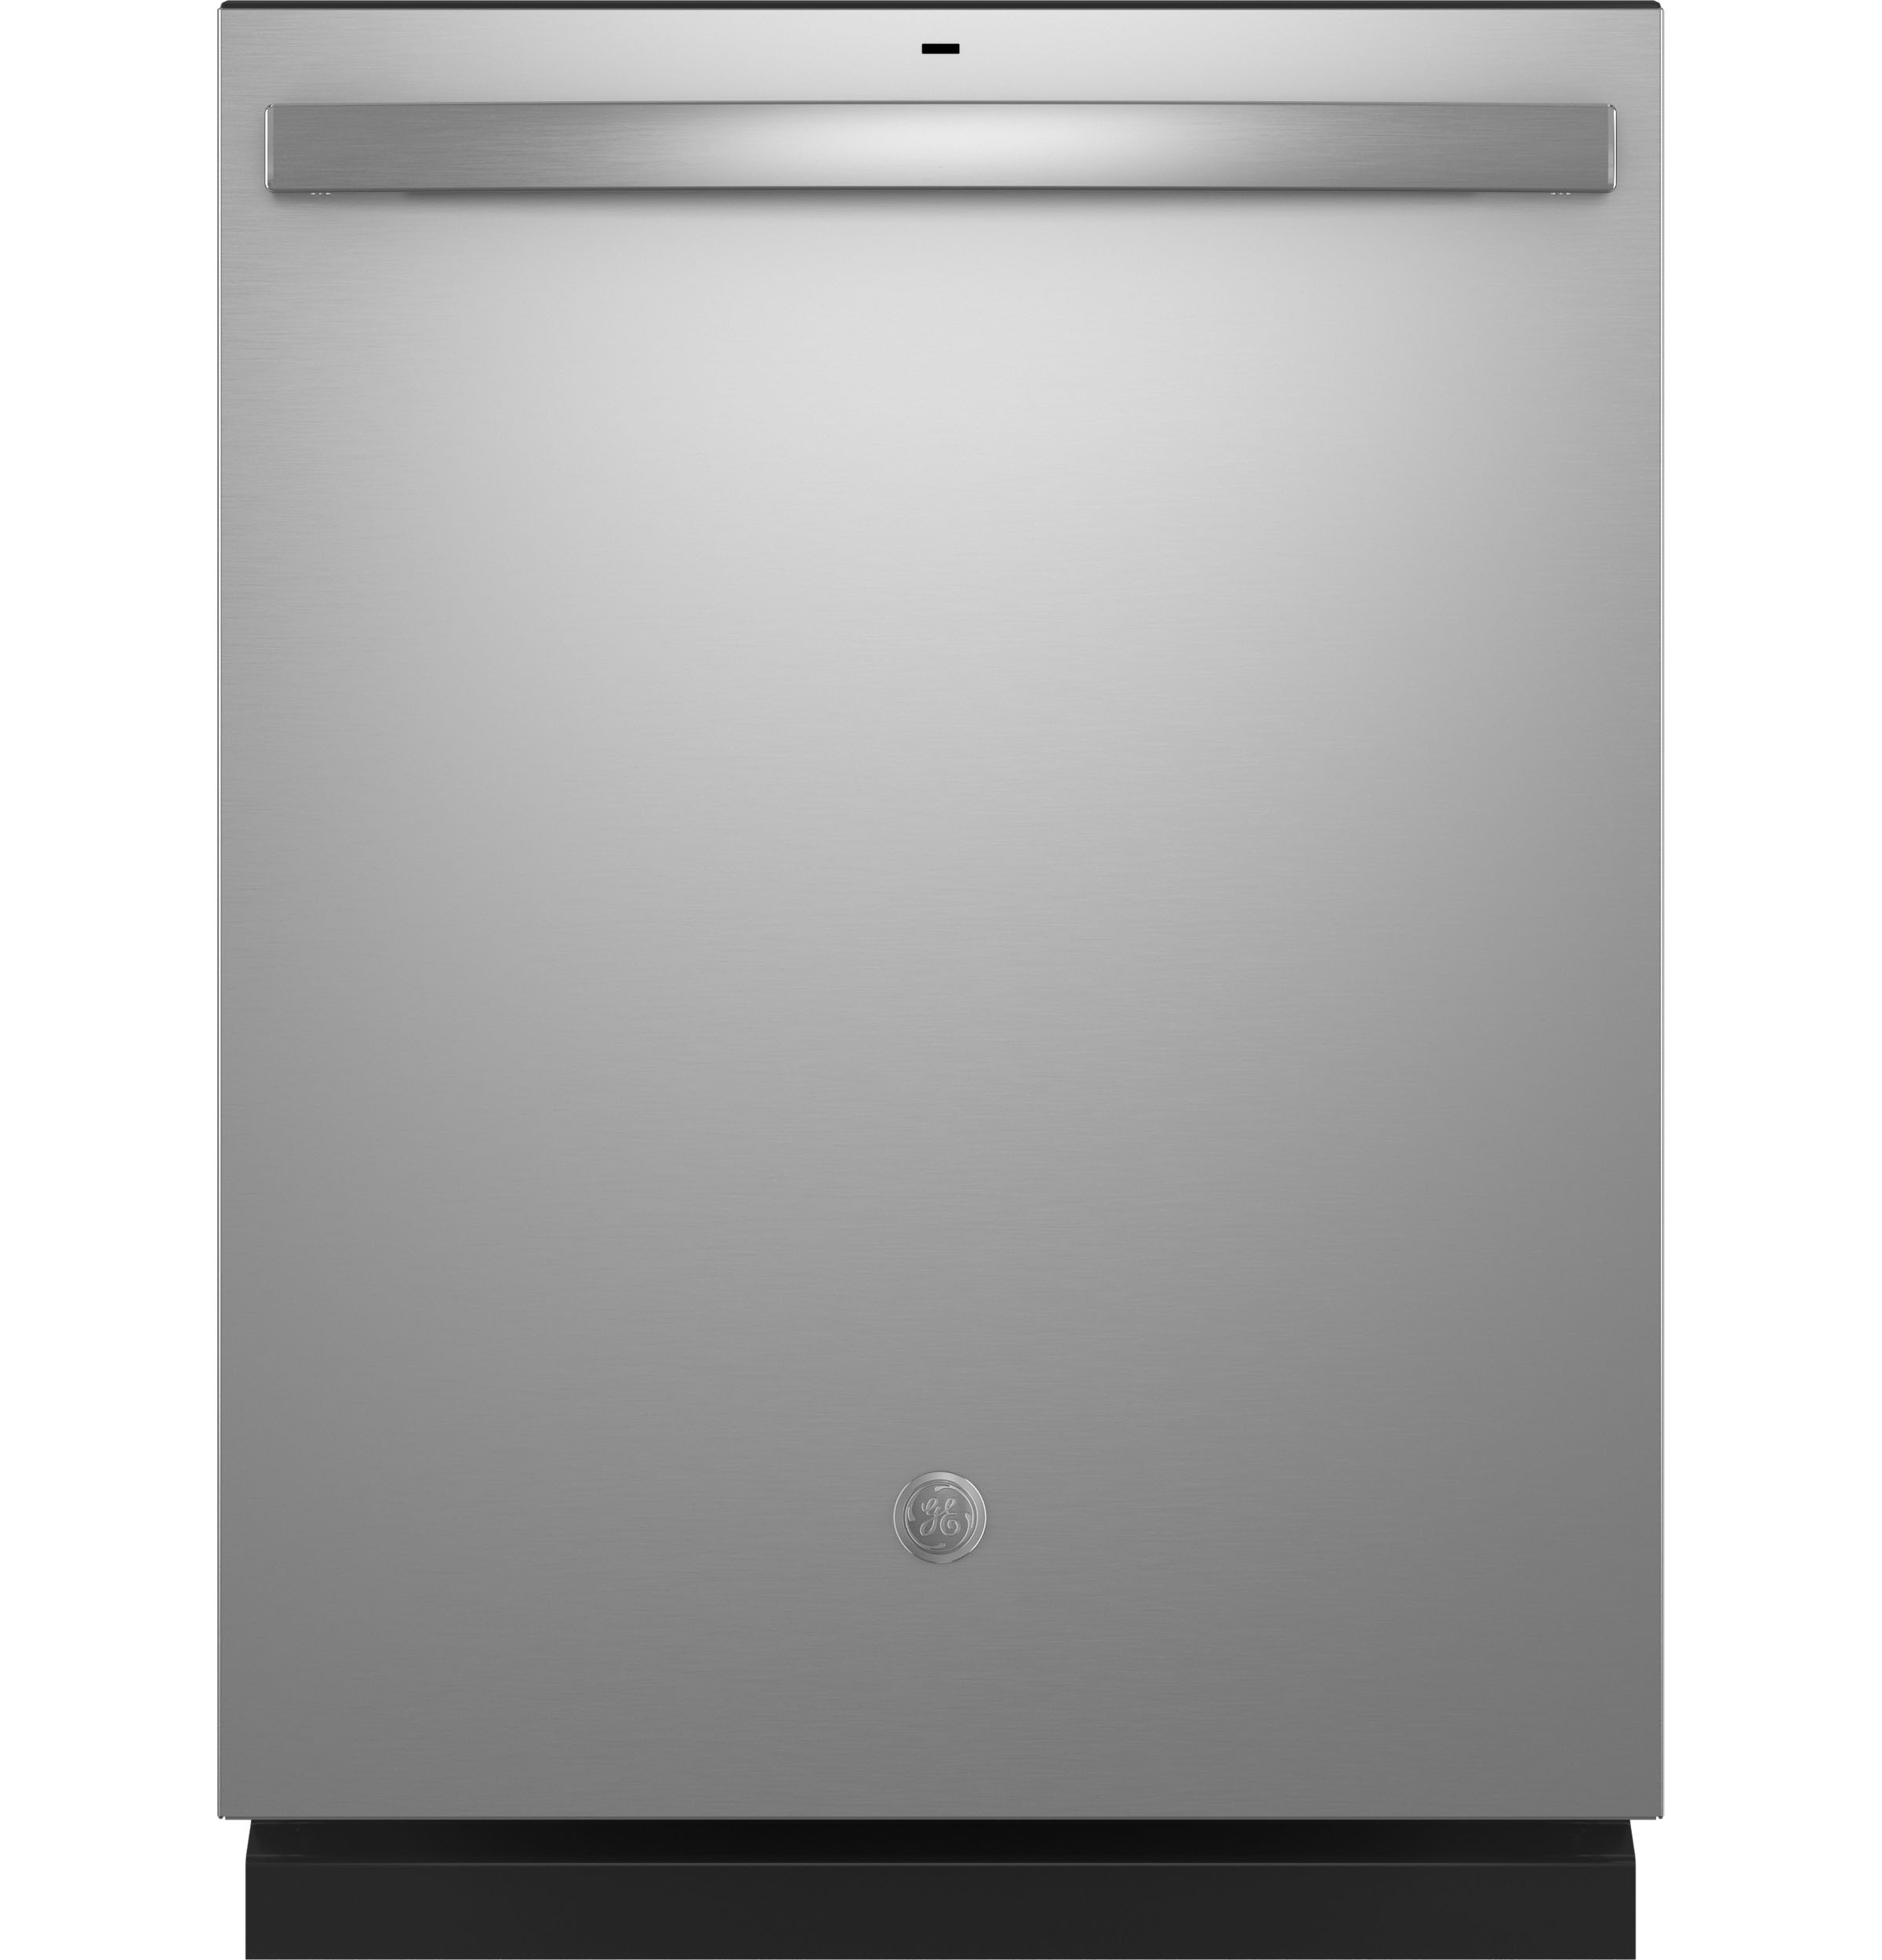 GE GE® ENERGY STAR® Top Control with Plastic Interior Dishwasher with Sanitize Cycle & Dry Boost